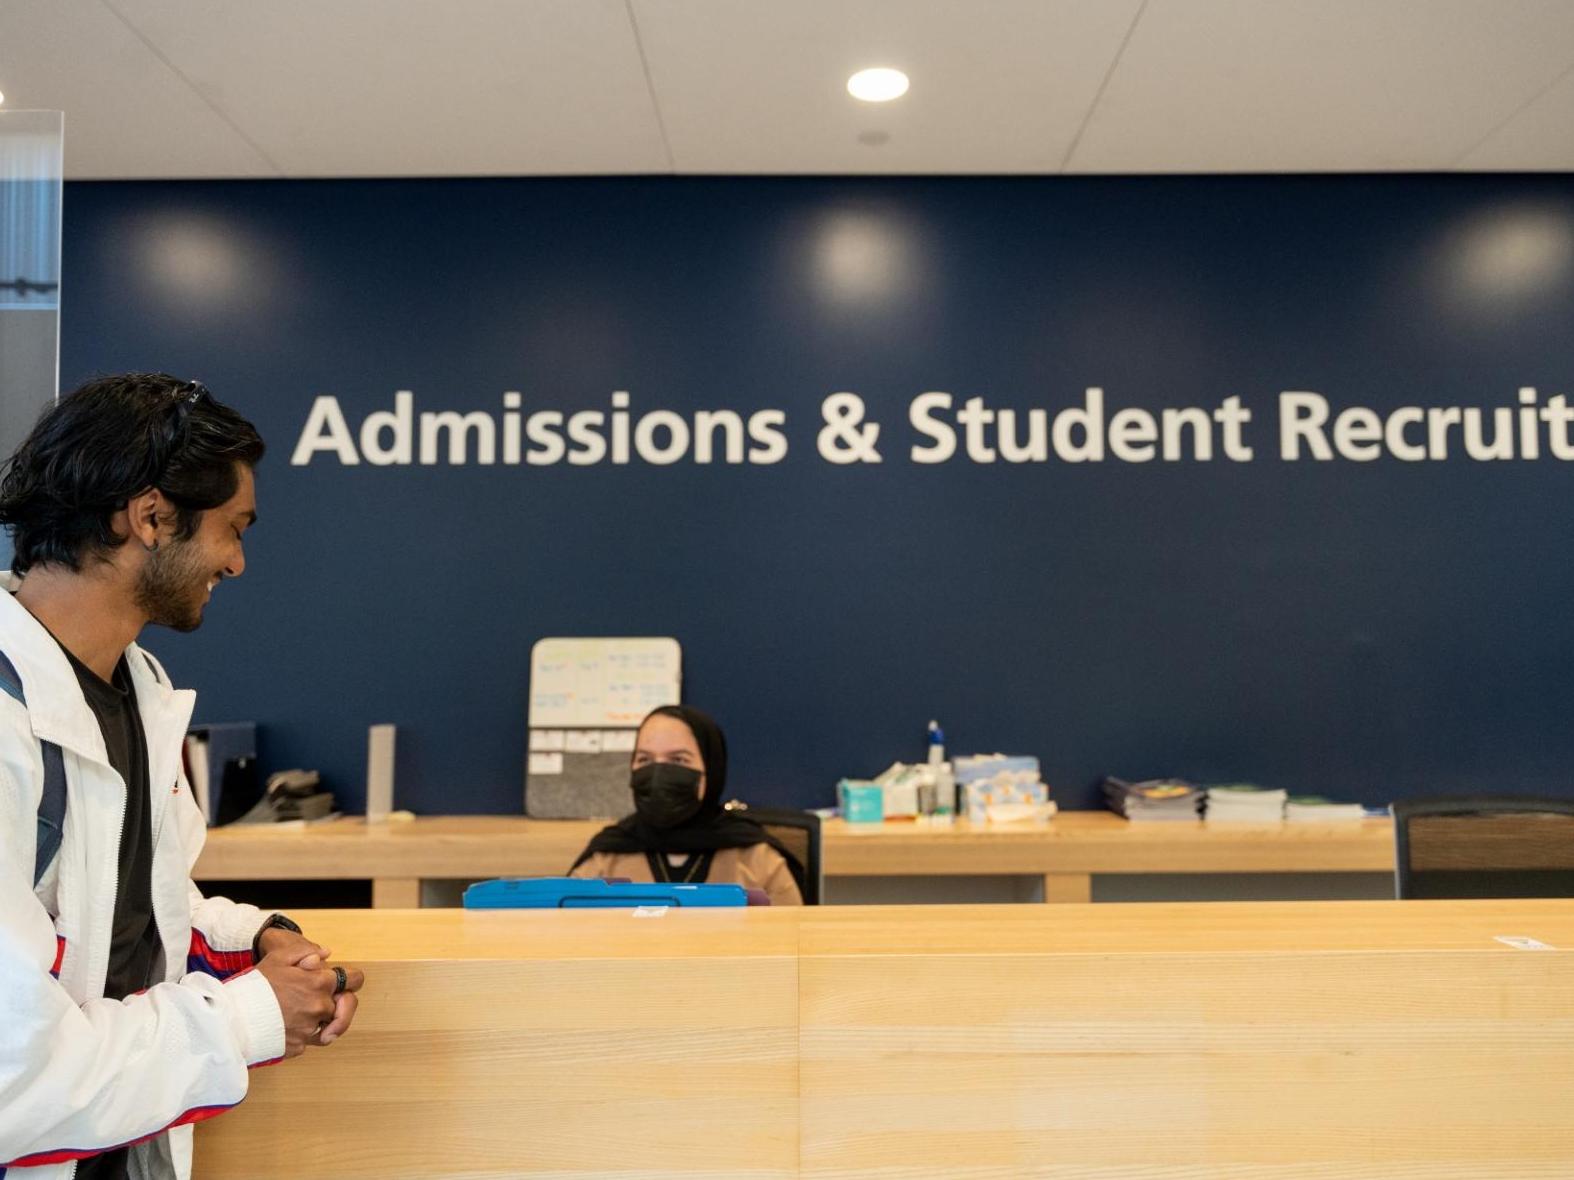 Student at Admissions & Student Recruitment front desk